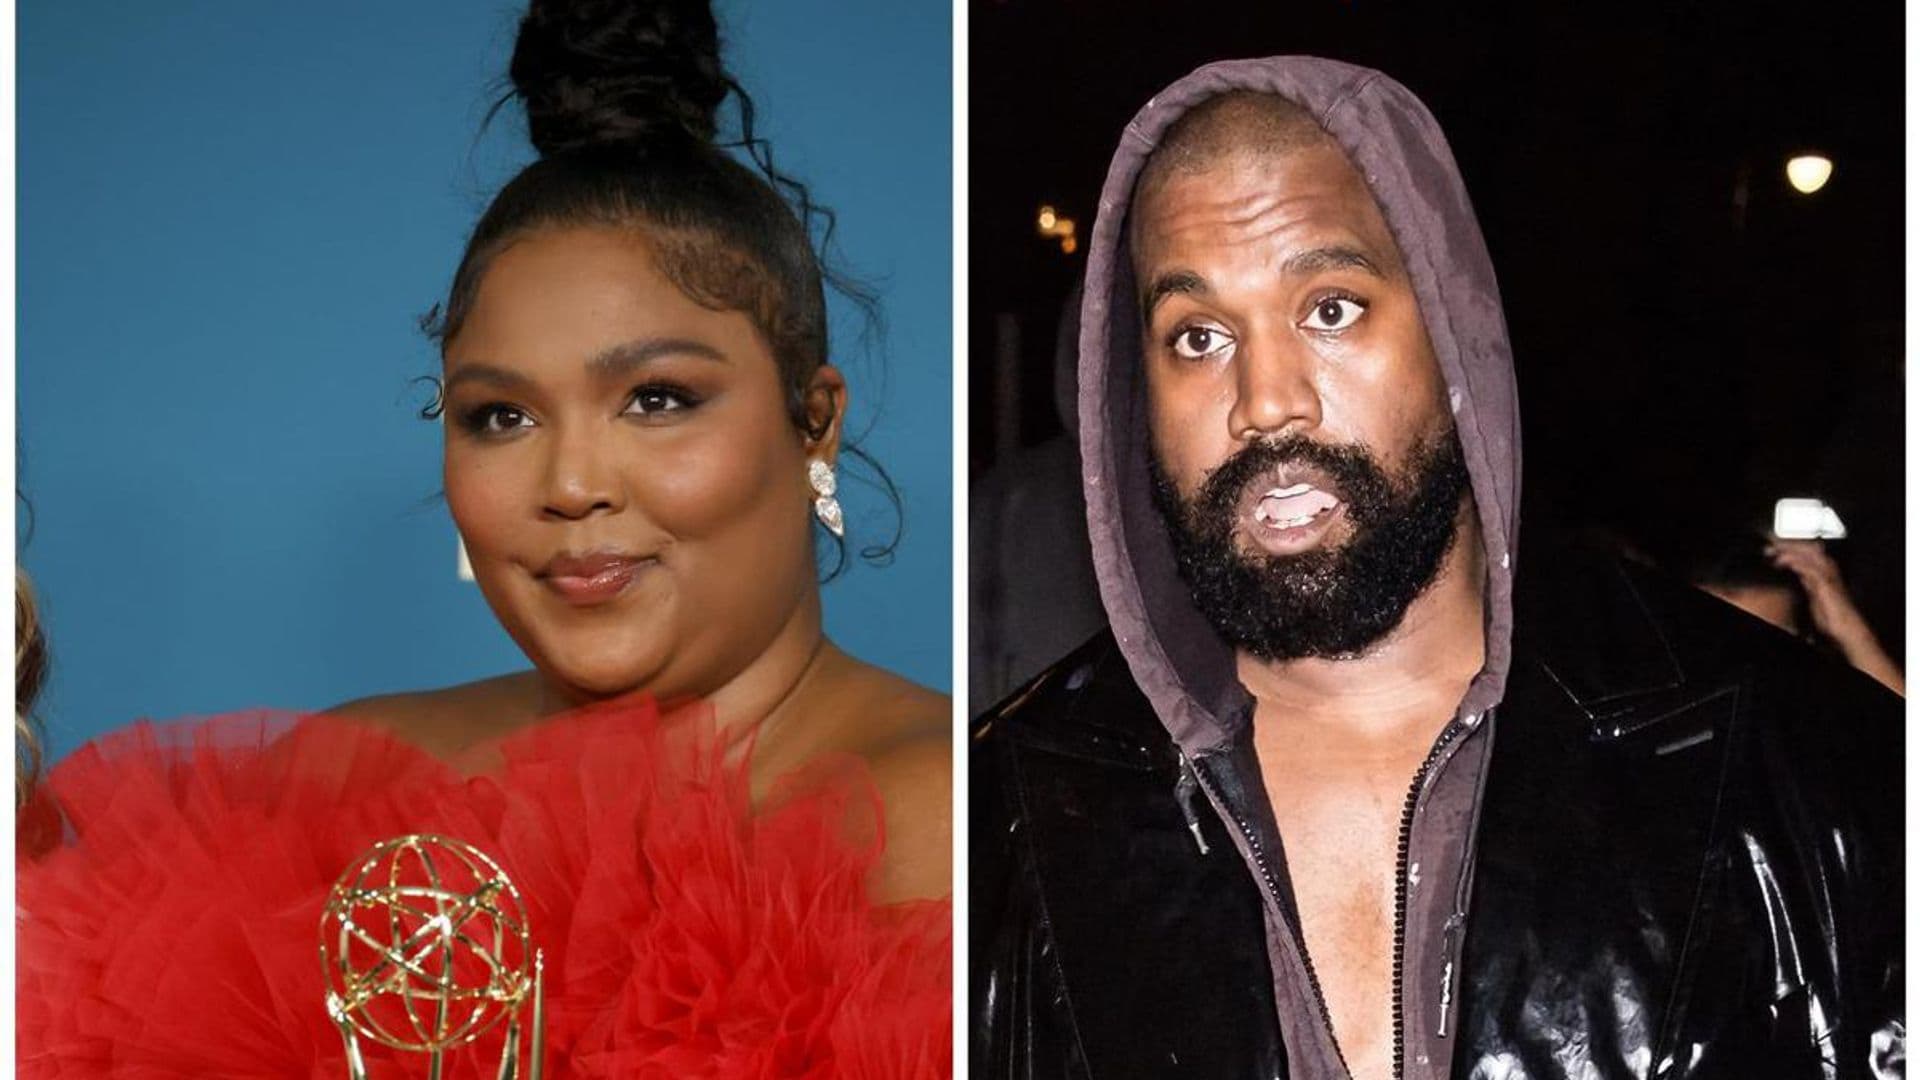 Lizzo responds to Kanye West’s negative comments about her weight